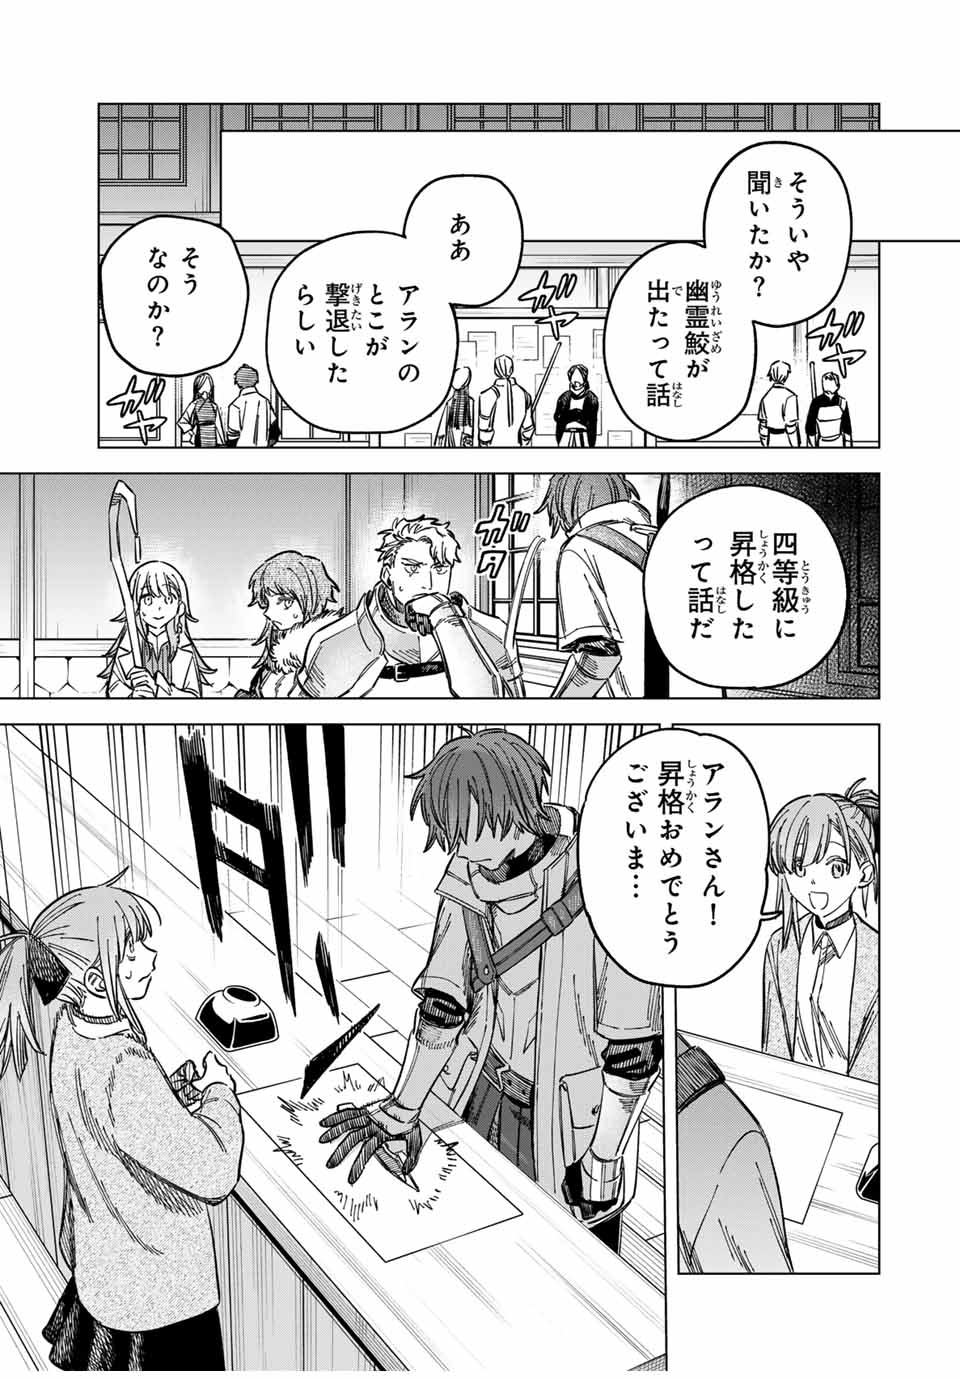 Witch and Mercenary 魔女と傭兵 第6話 - Page 17